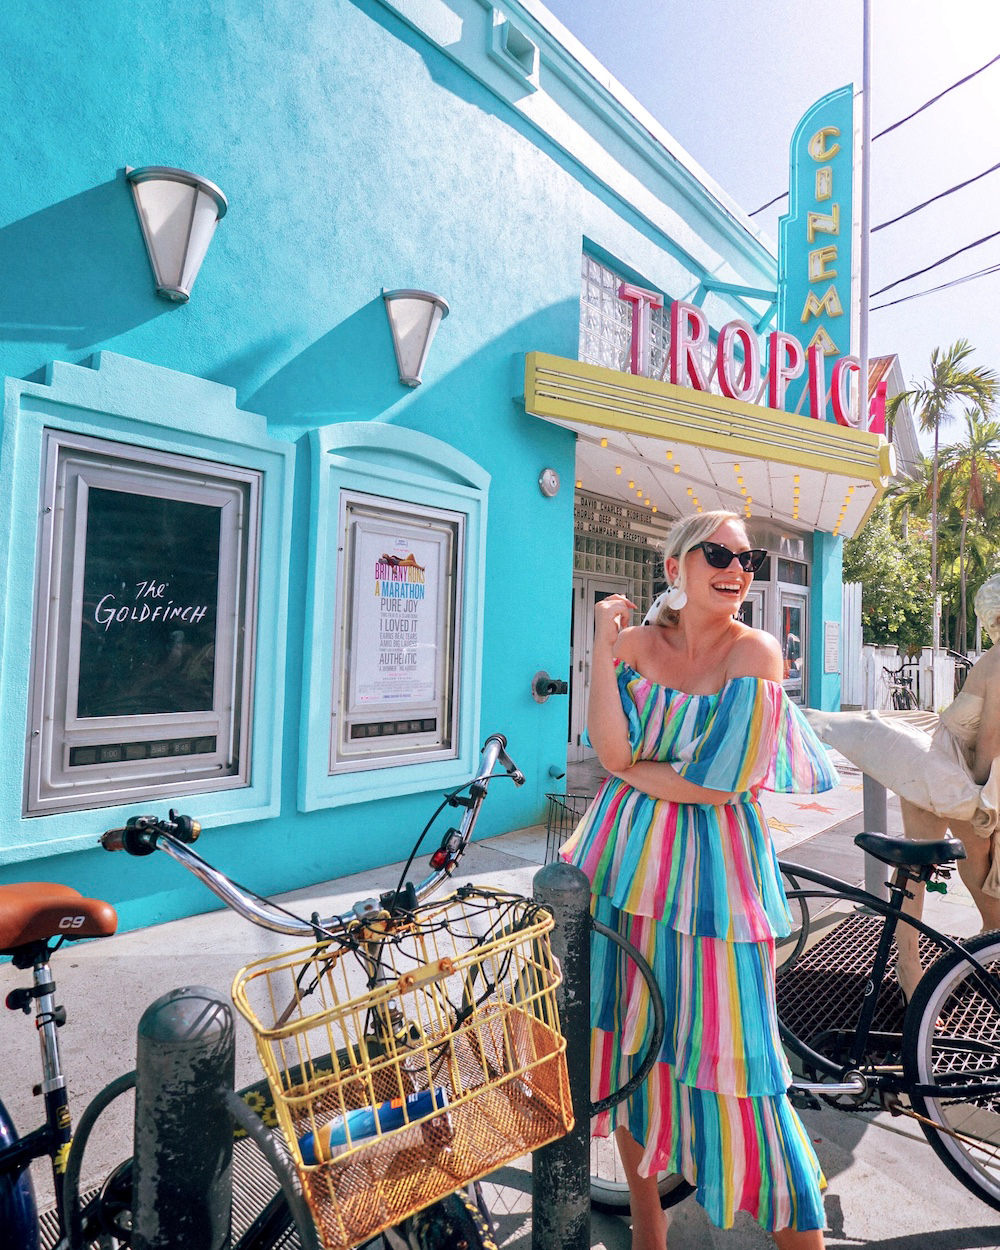 So you've planned a wonderful 4 day trip to Miami and now you're looking for the perfect itinerary for your visit… well, this guide is for you! I’ve put together the ultimate 4 days in Miami itinerary that will have you seeing and experiencing all of Miami’s top sights and attractions. From South Beach to Little Havana, the Wynwood Arts District to the Everglades, and even a day trip to Key West! This really is the perfect 4 day itinerary to get the most out of your time in Miami. Pictured here: Do a day trip to Key West